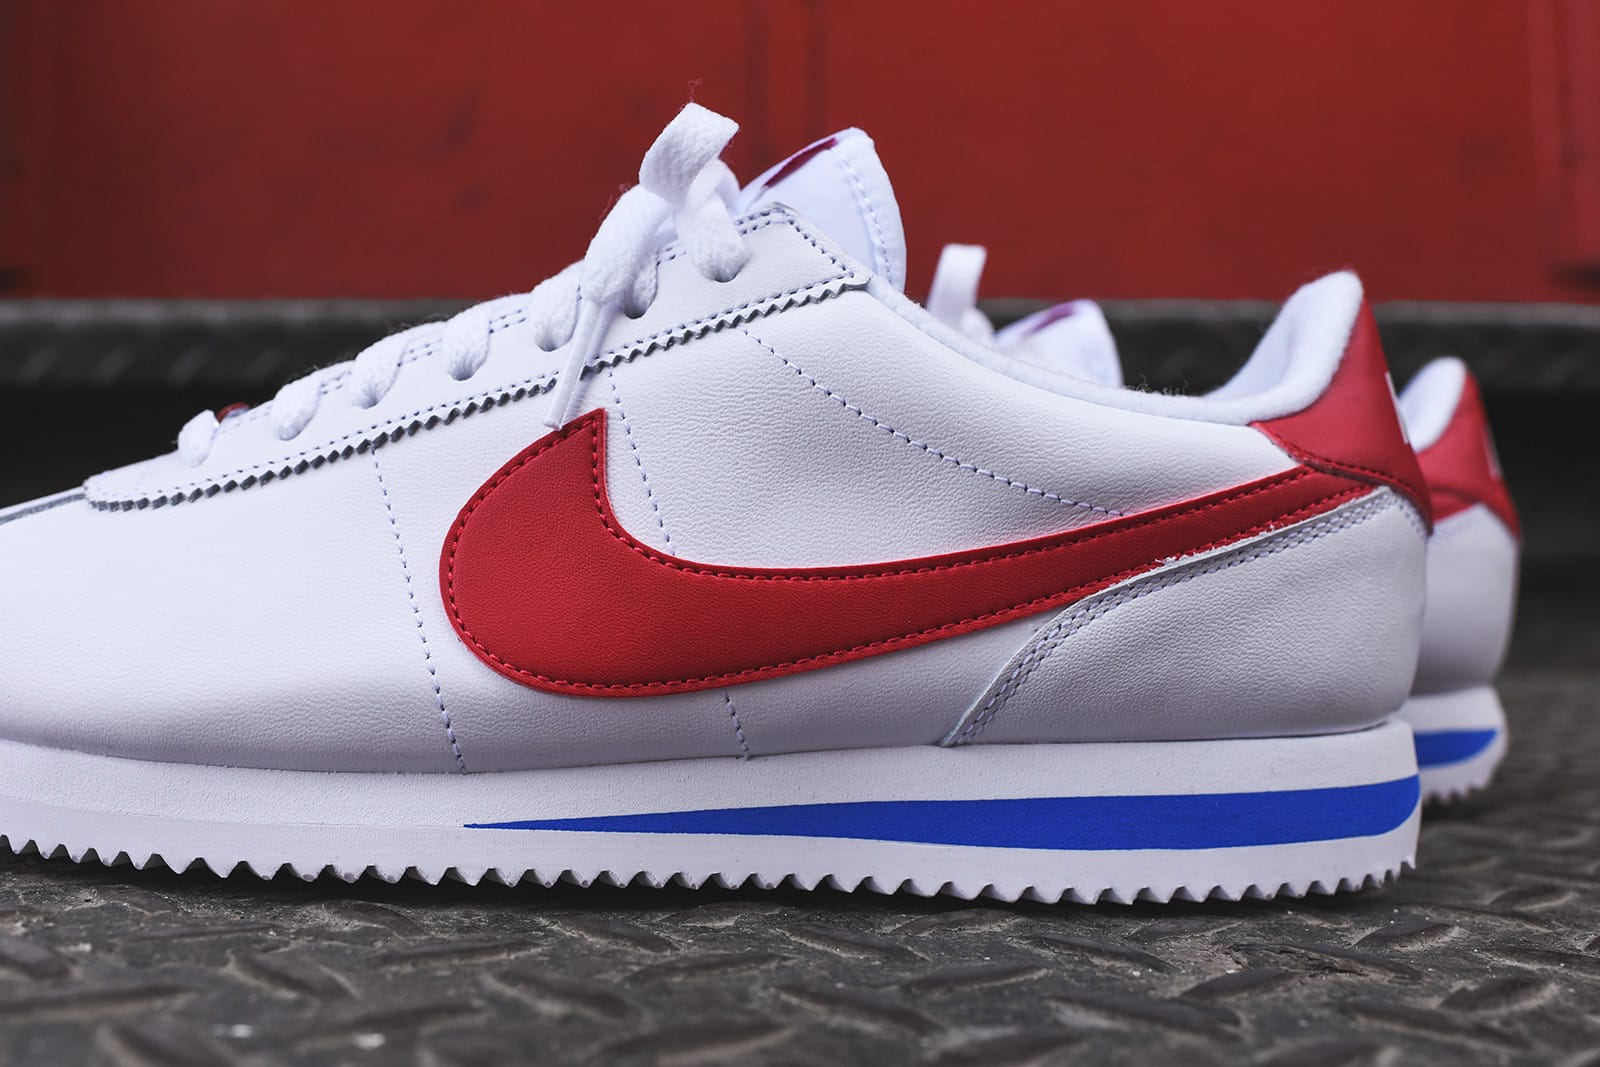 nike cortez red blue